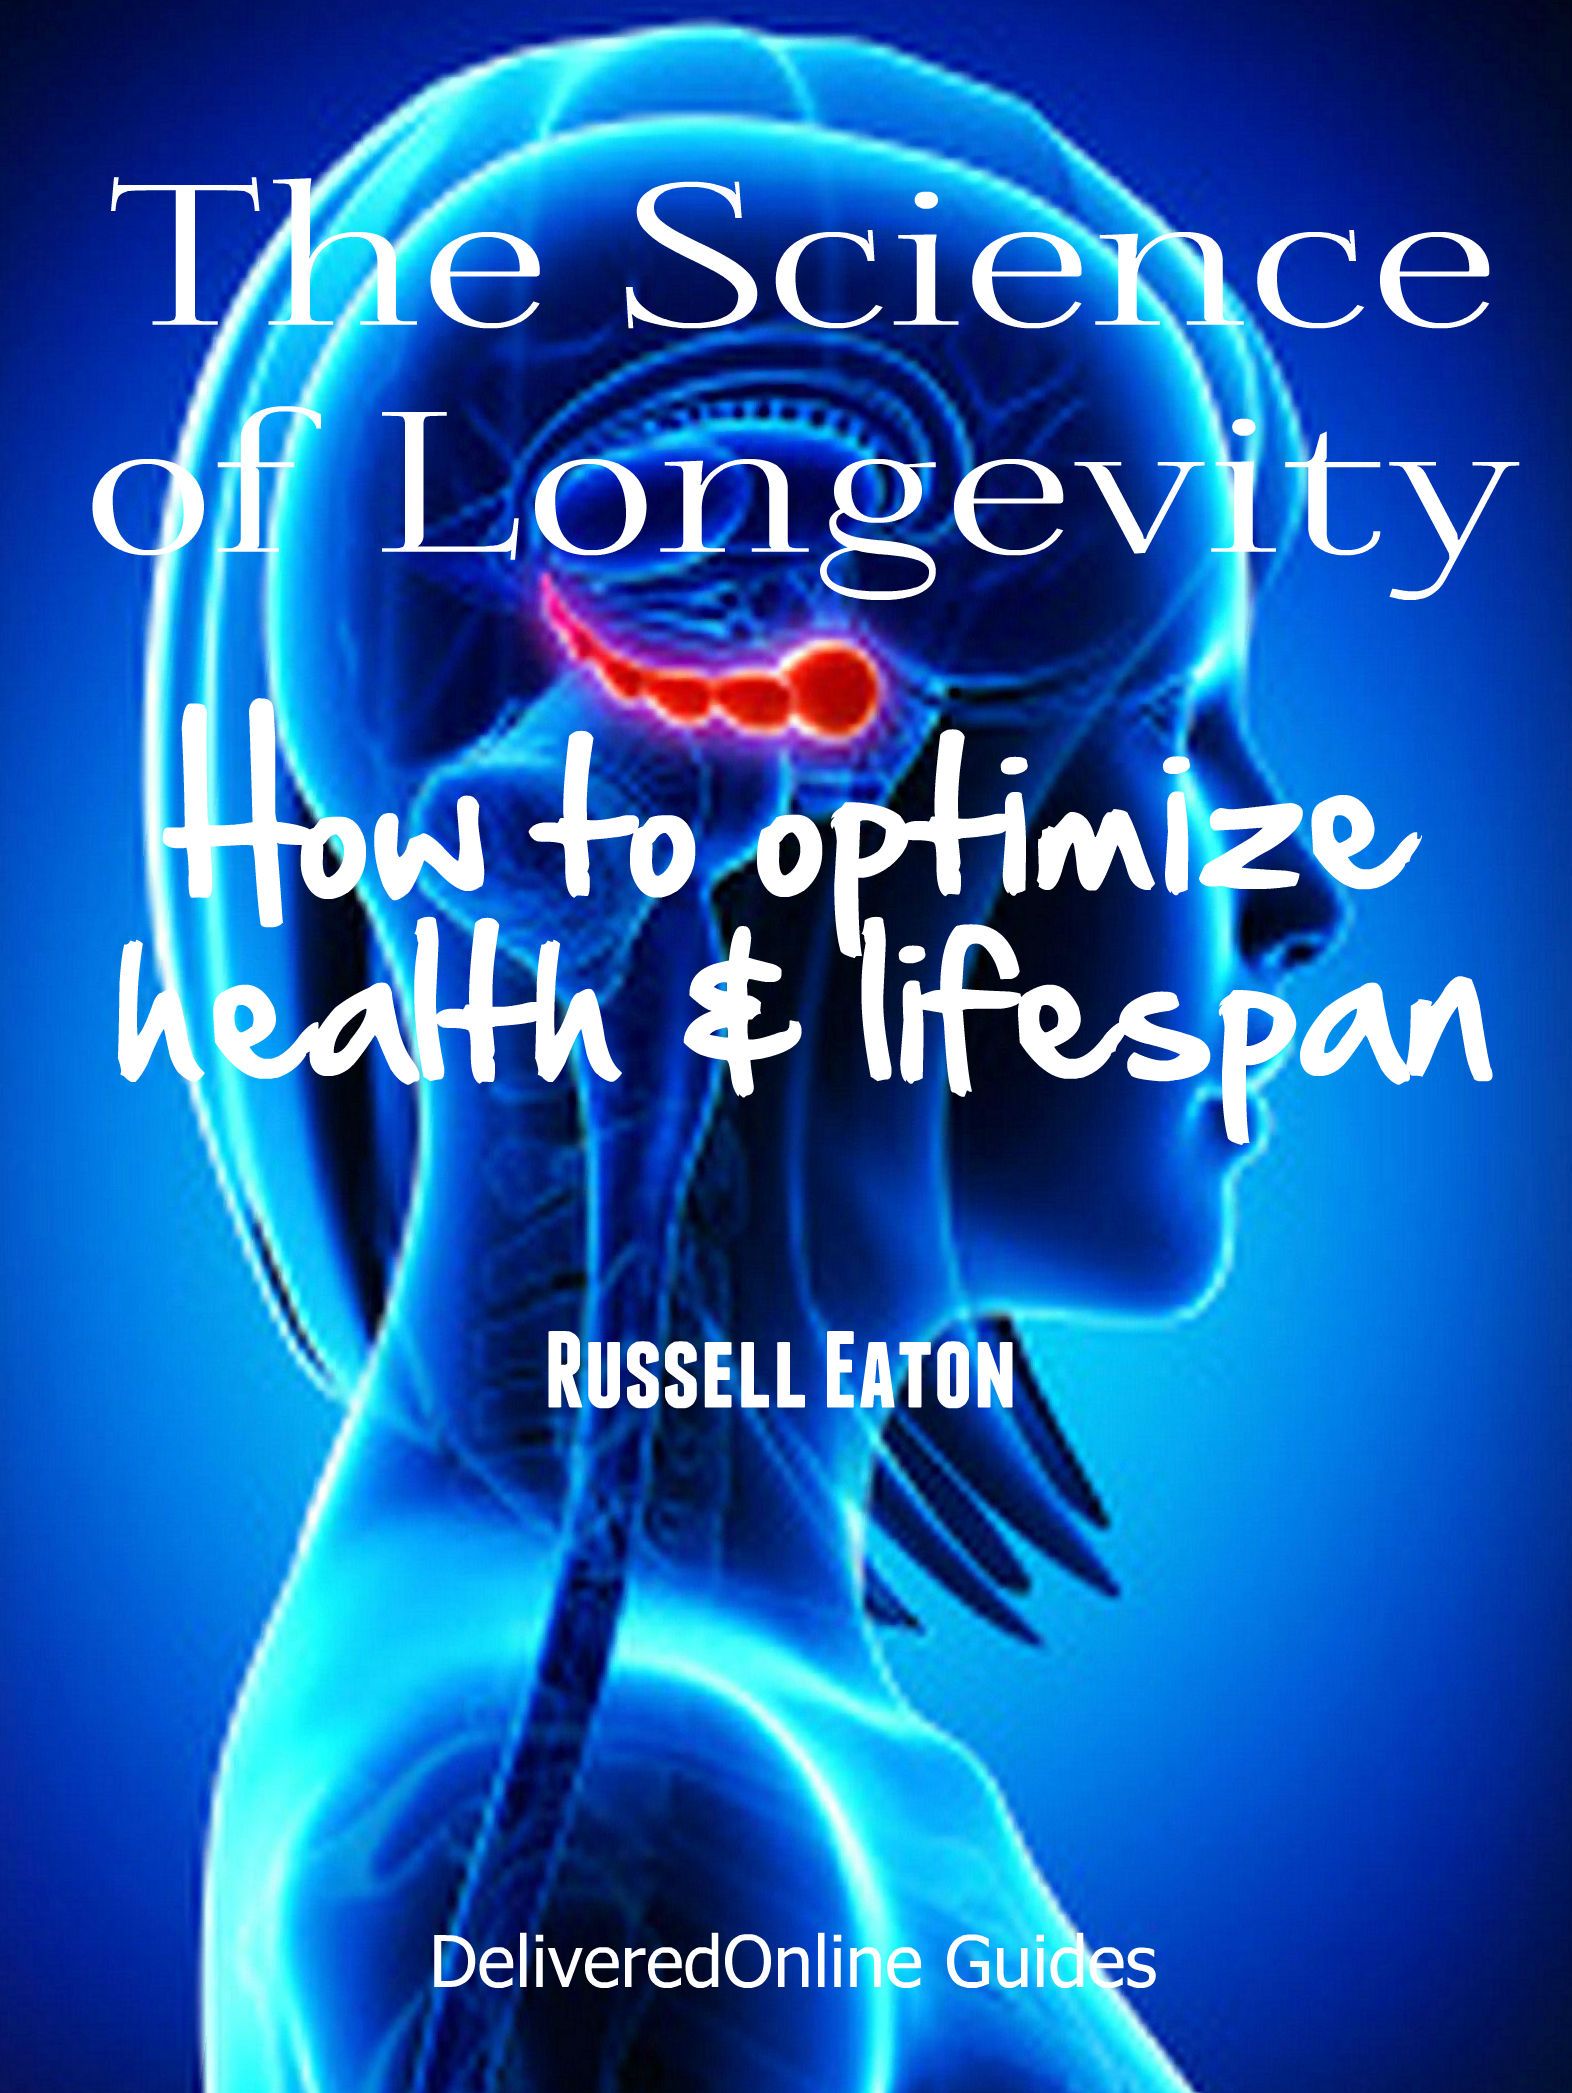 The Science of Longevity: How to Optimize Health and Life Span